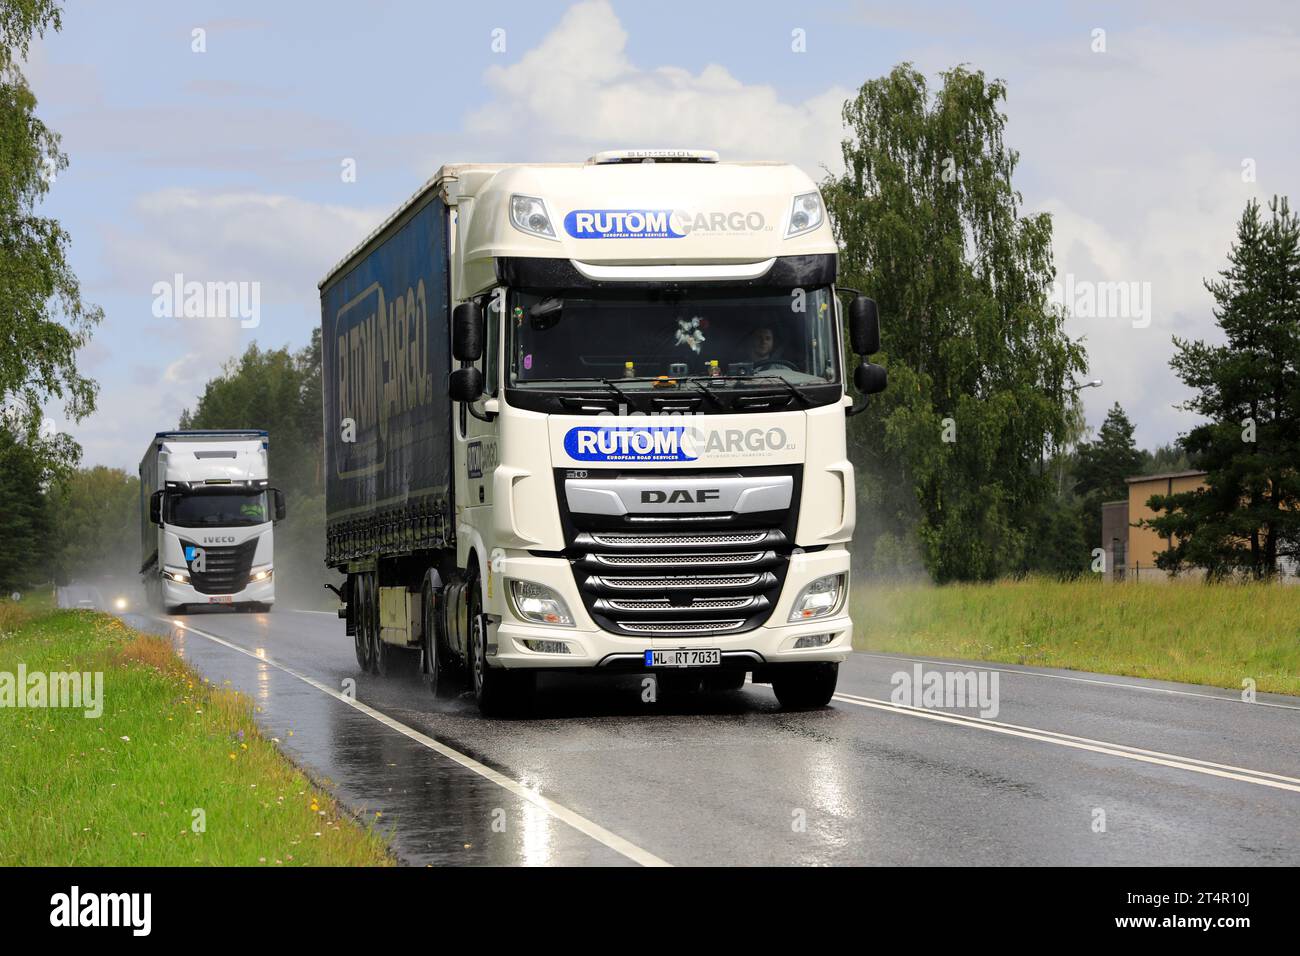 DAF XF Rutom Cargo and Iveco S-Way semi trailer trucks transport goods along highway on a rainy, thundery day. Salo, Finland. July 20, 2023. Stock Photo